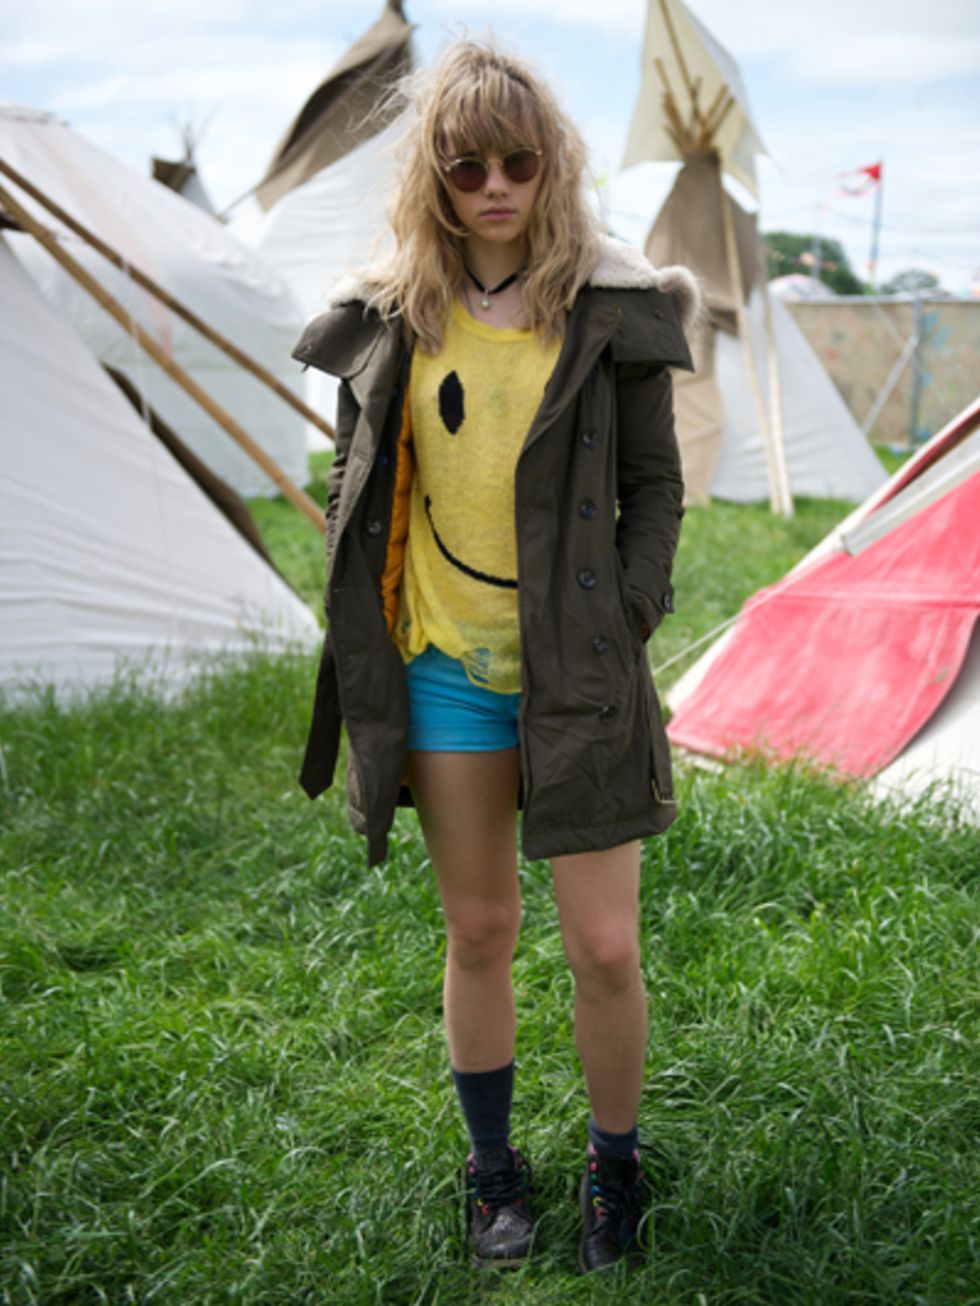 Style, Boot, Sunglasses, Bag, Wing, Blond, Long hair, Tent, Fictional character, Costume, 